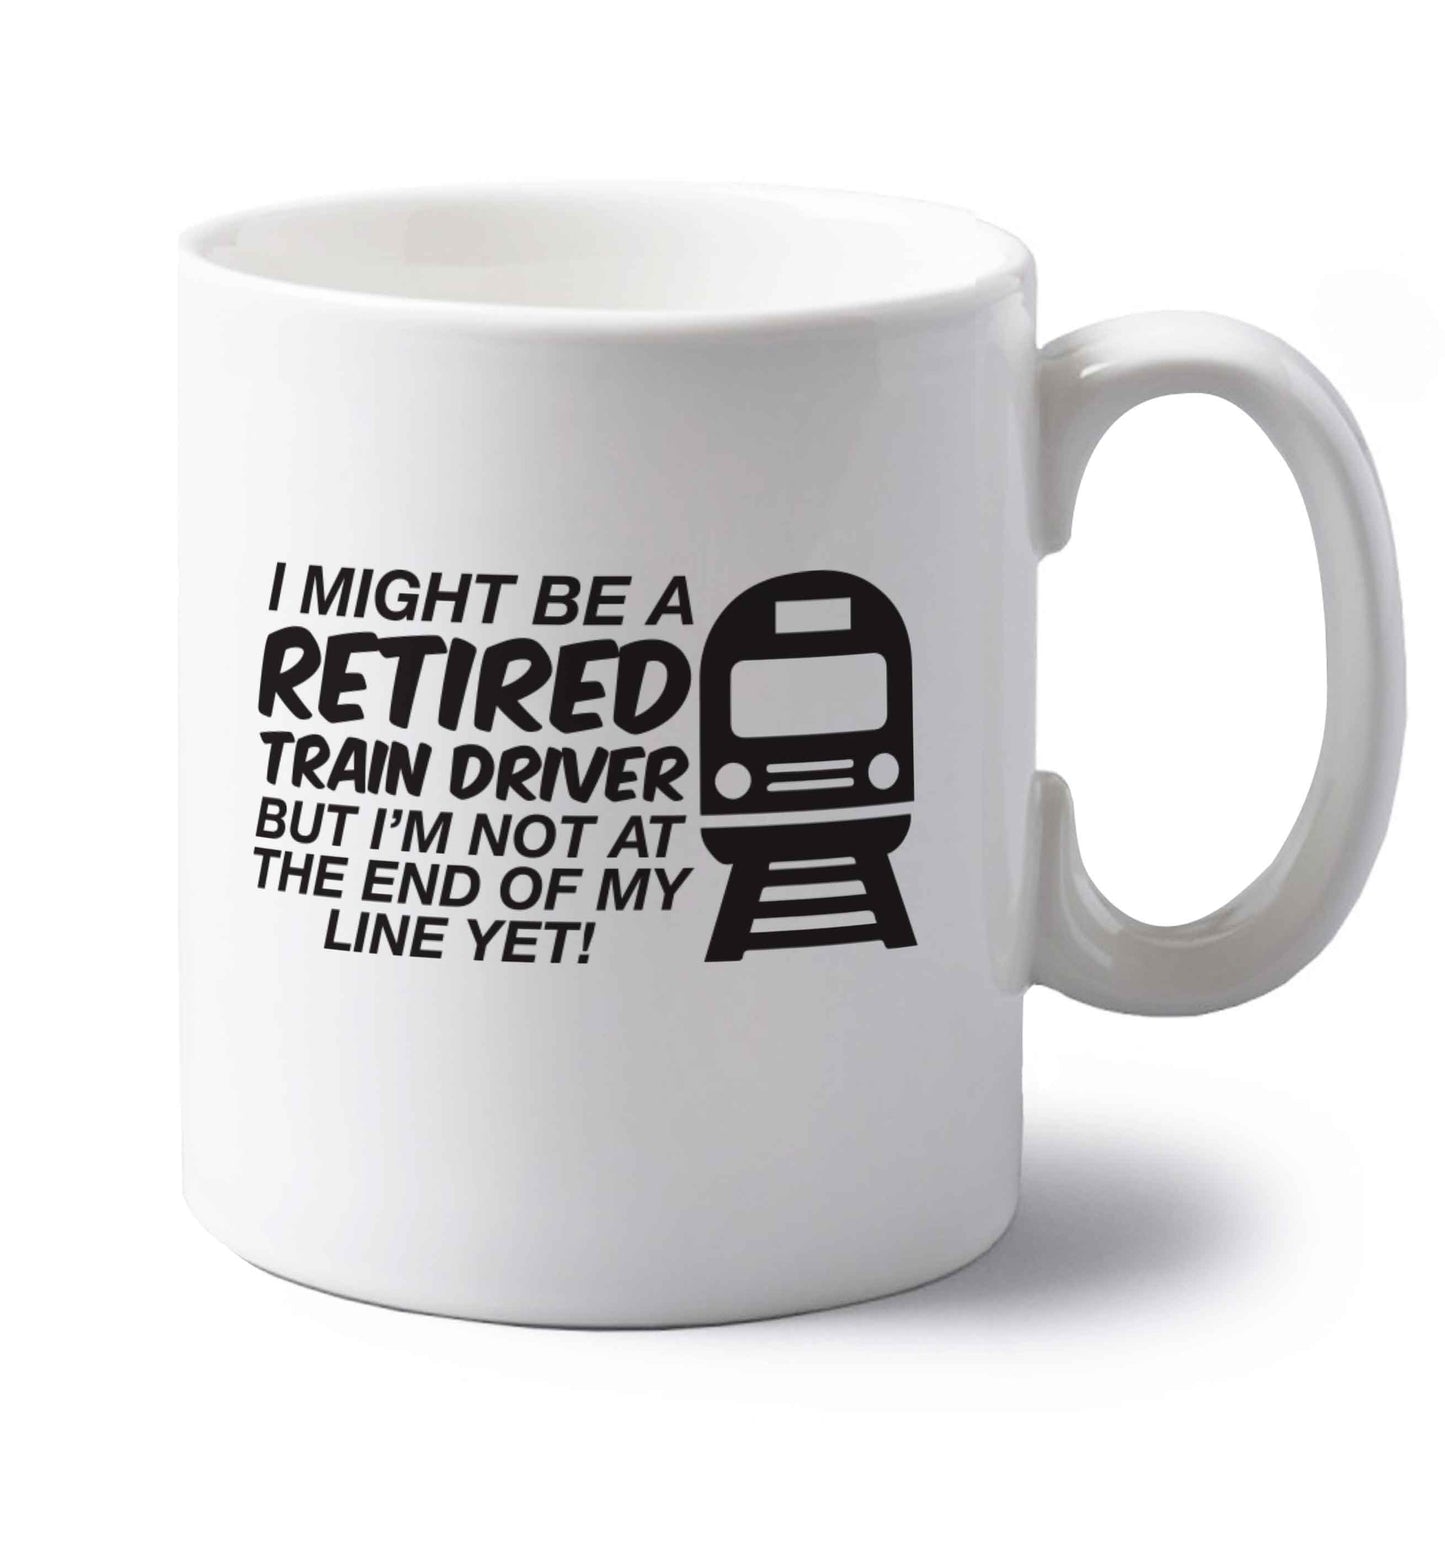 Retired train driver but I'm not at the end of my line yet left handed white ceramic mug 